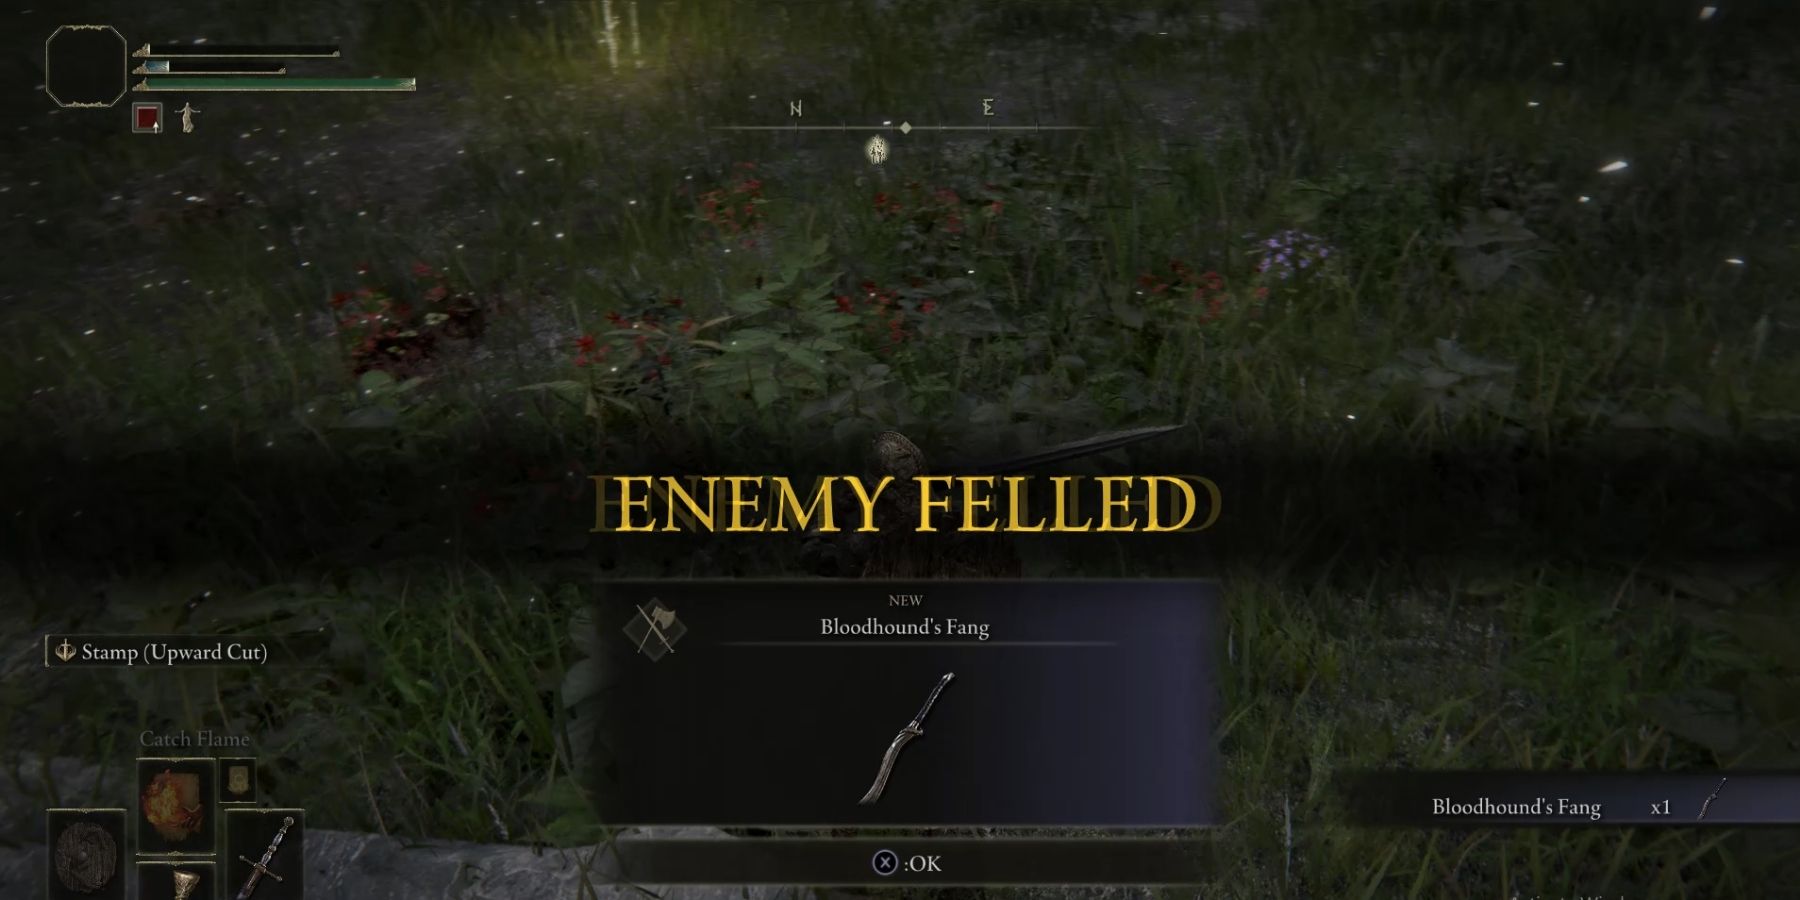 Obtaining the Bloodhound's Fang in Elden Ring